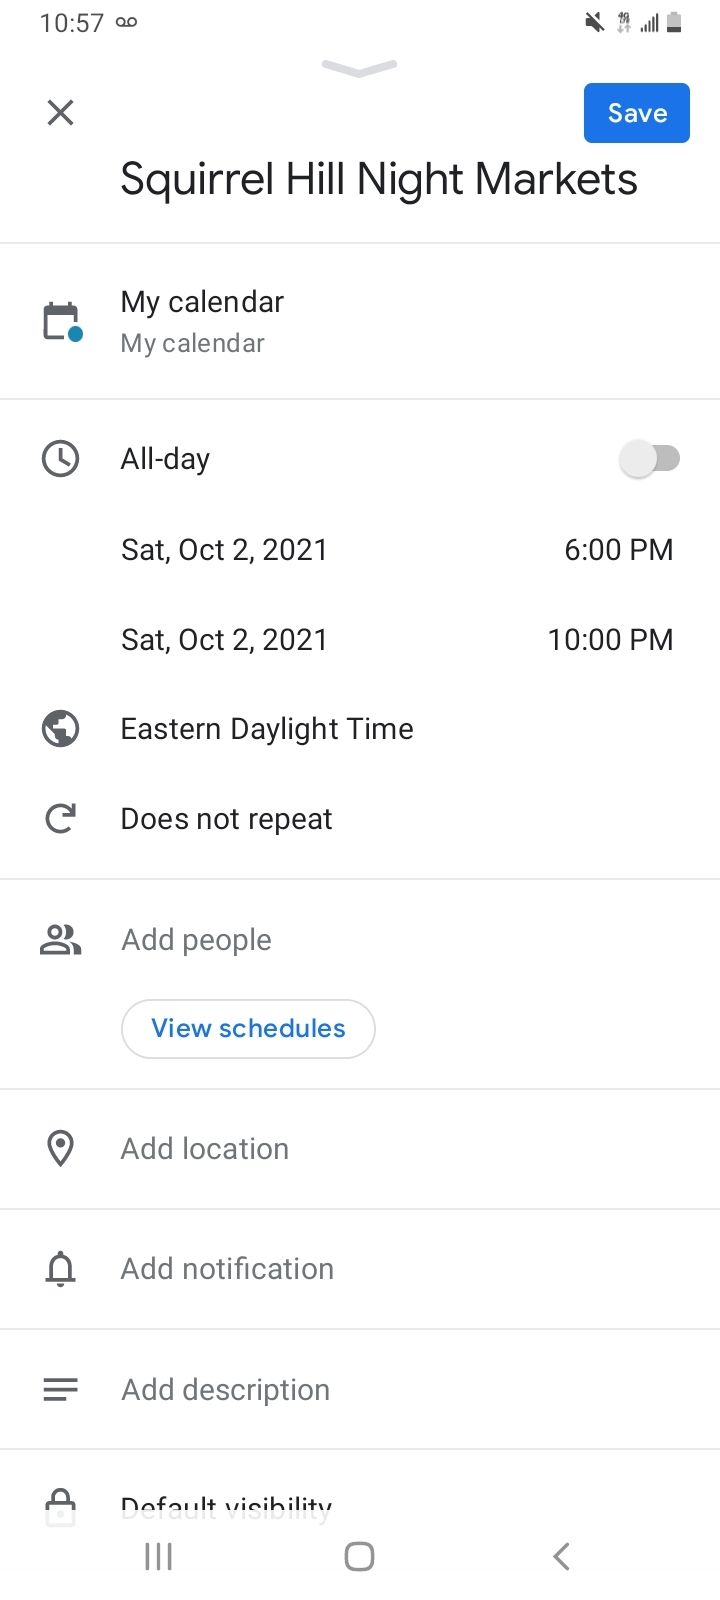 What is Google Lens used for? It's just added a new event to my calendar.